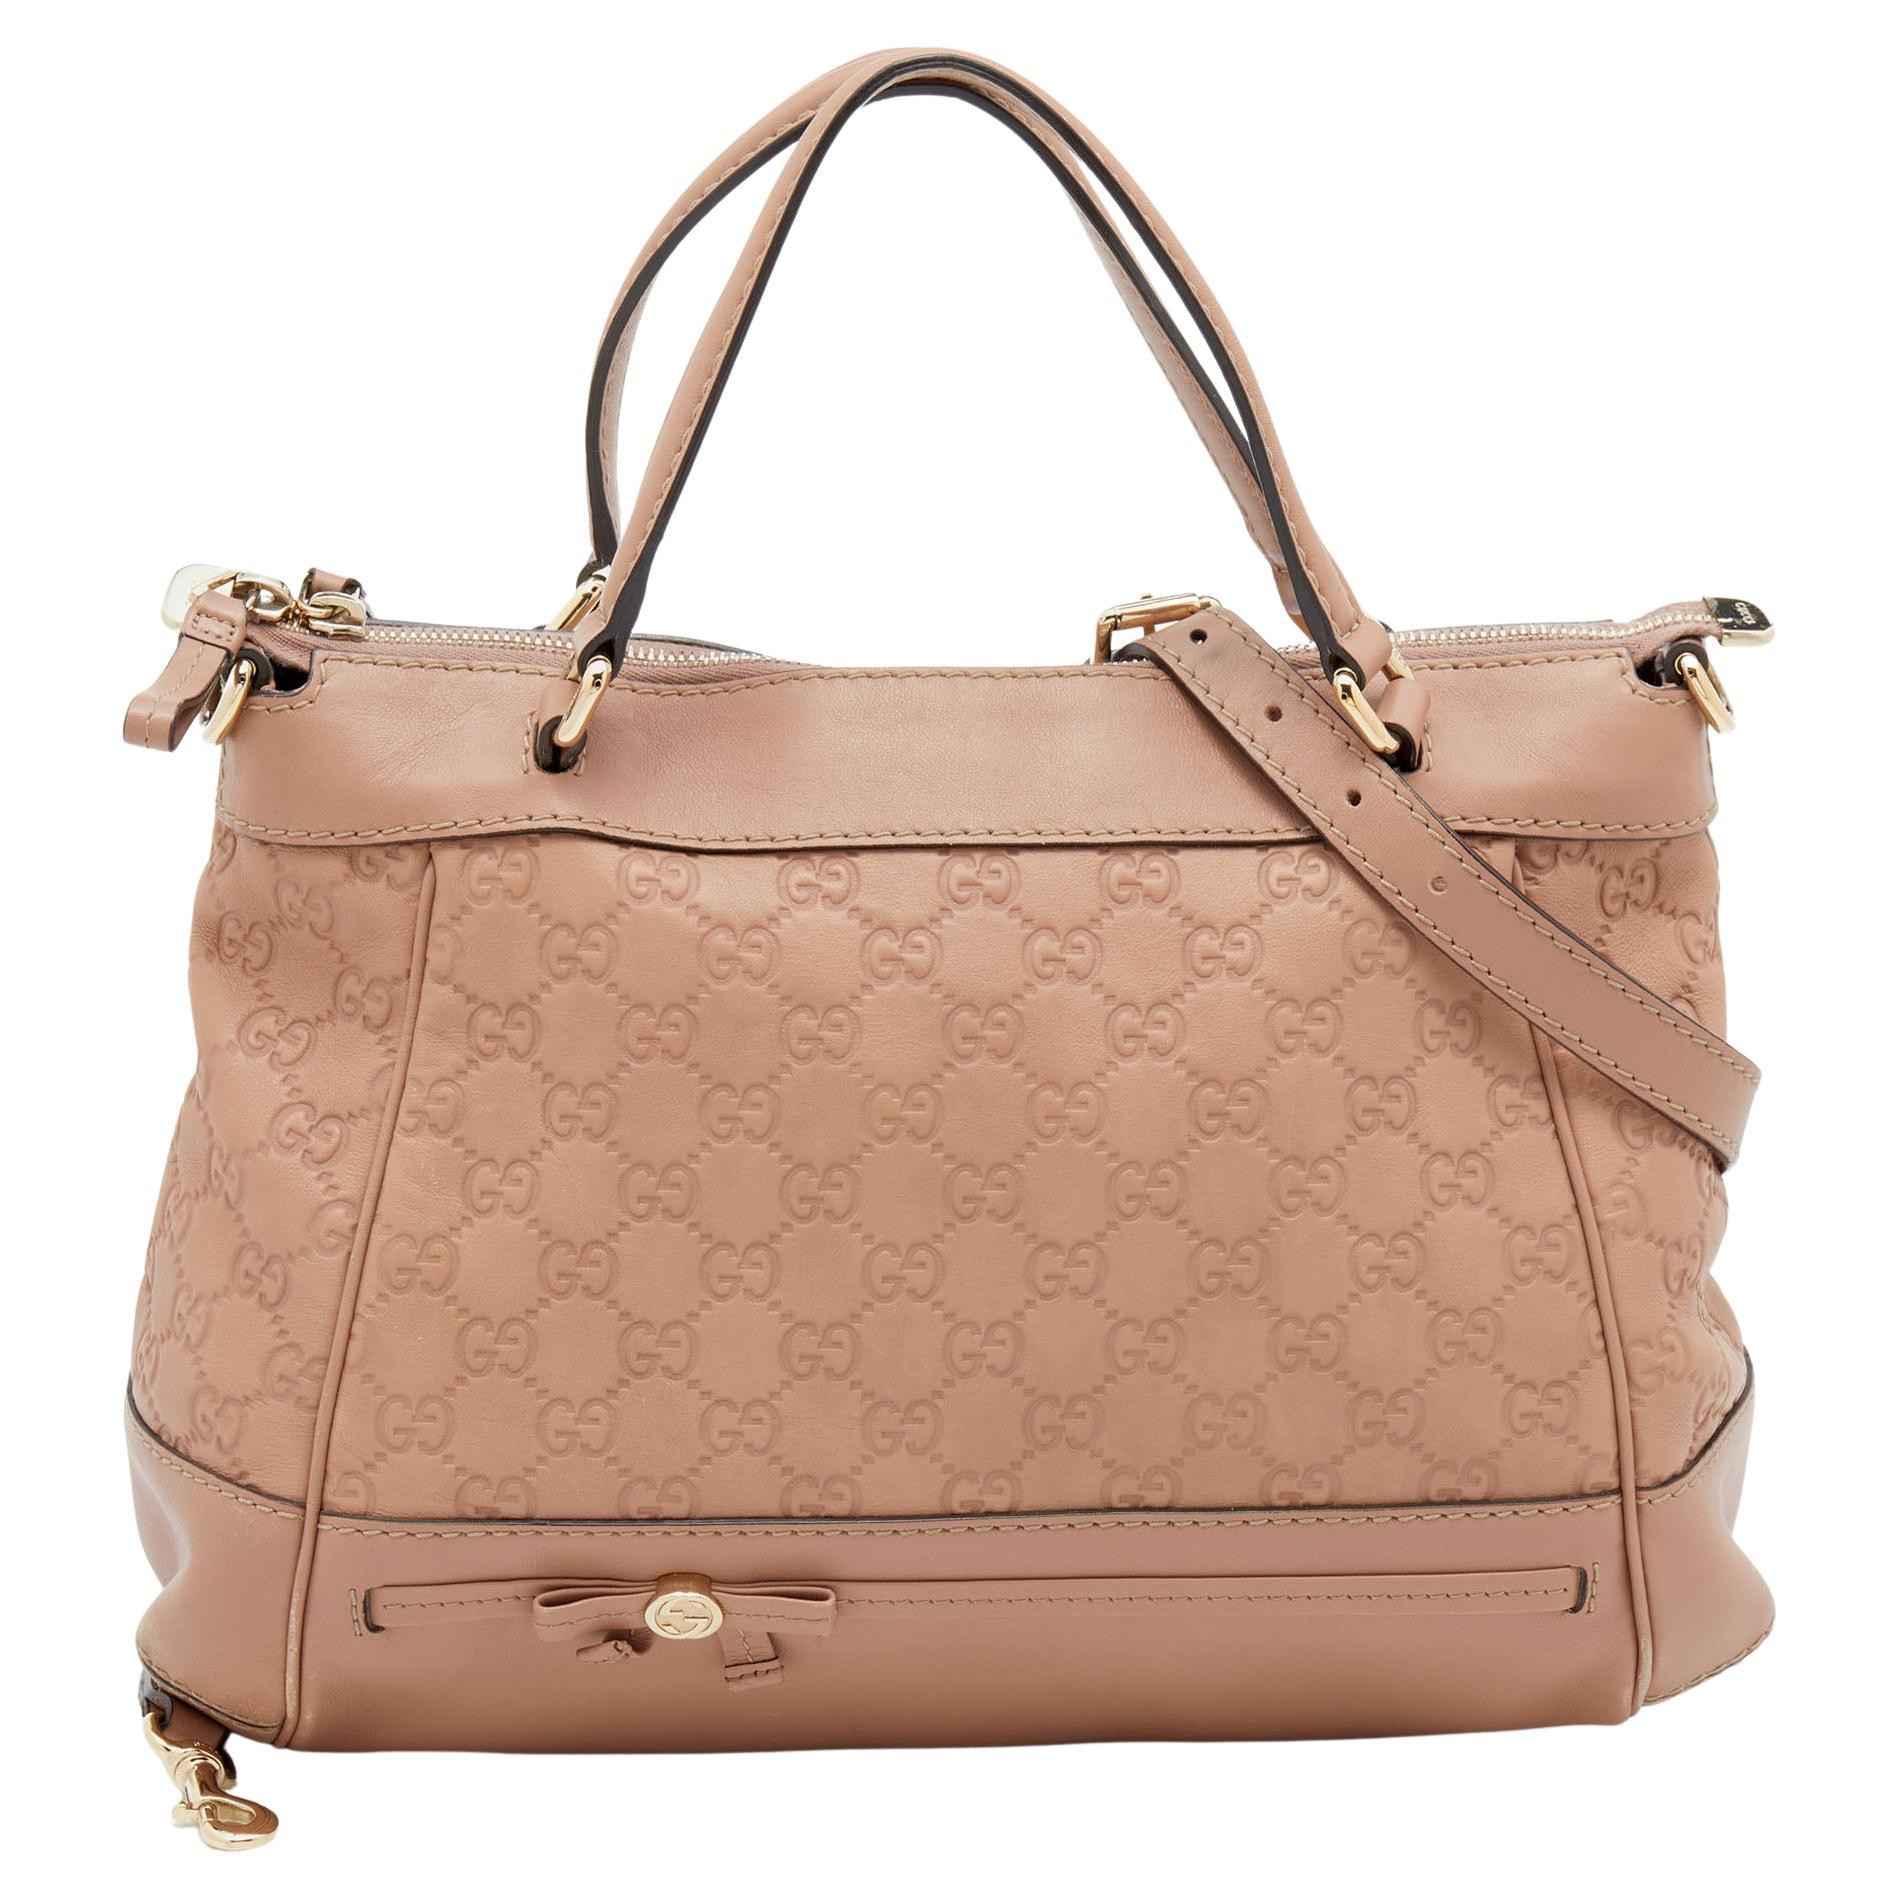 Gucci Beige Guccissima Leather Mayfair Bow Tote